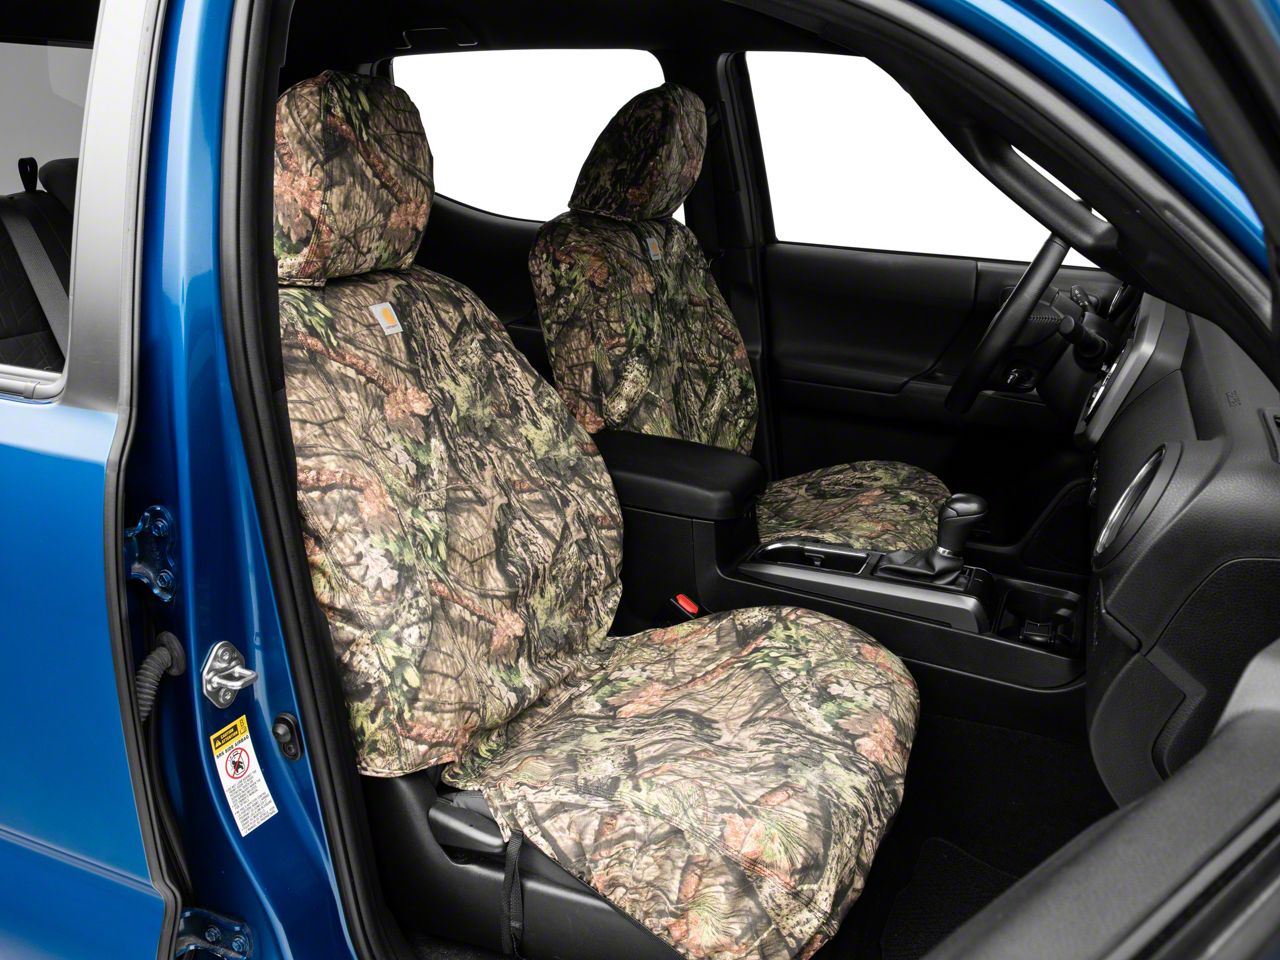 Duck Weave Break Up Country Ssc3283camb Covercraft Carhartt Mossy Oak Camo Seatsaver Front Row Custom Fit Seat Cover For Select Chevrolet Gmc Models Interior Accessories Covers - Mossy Oak Camo Carhartt Seatsaver Custom Seat Covers